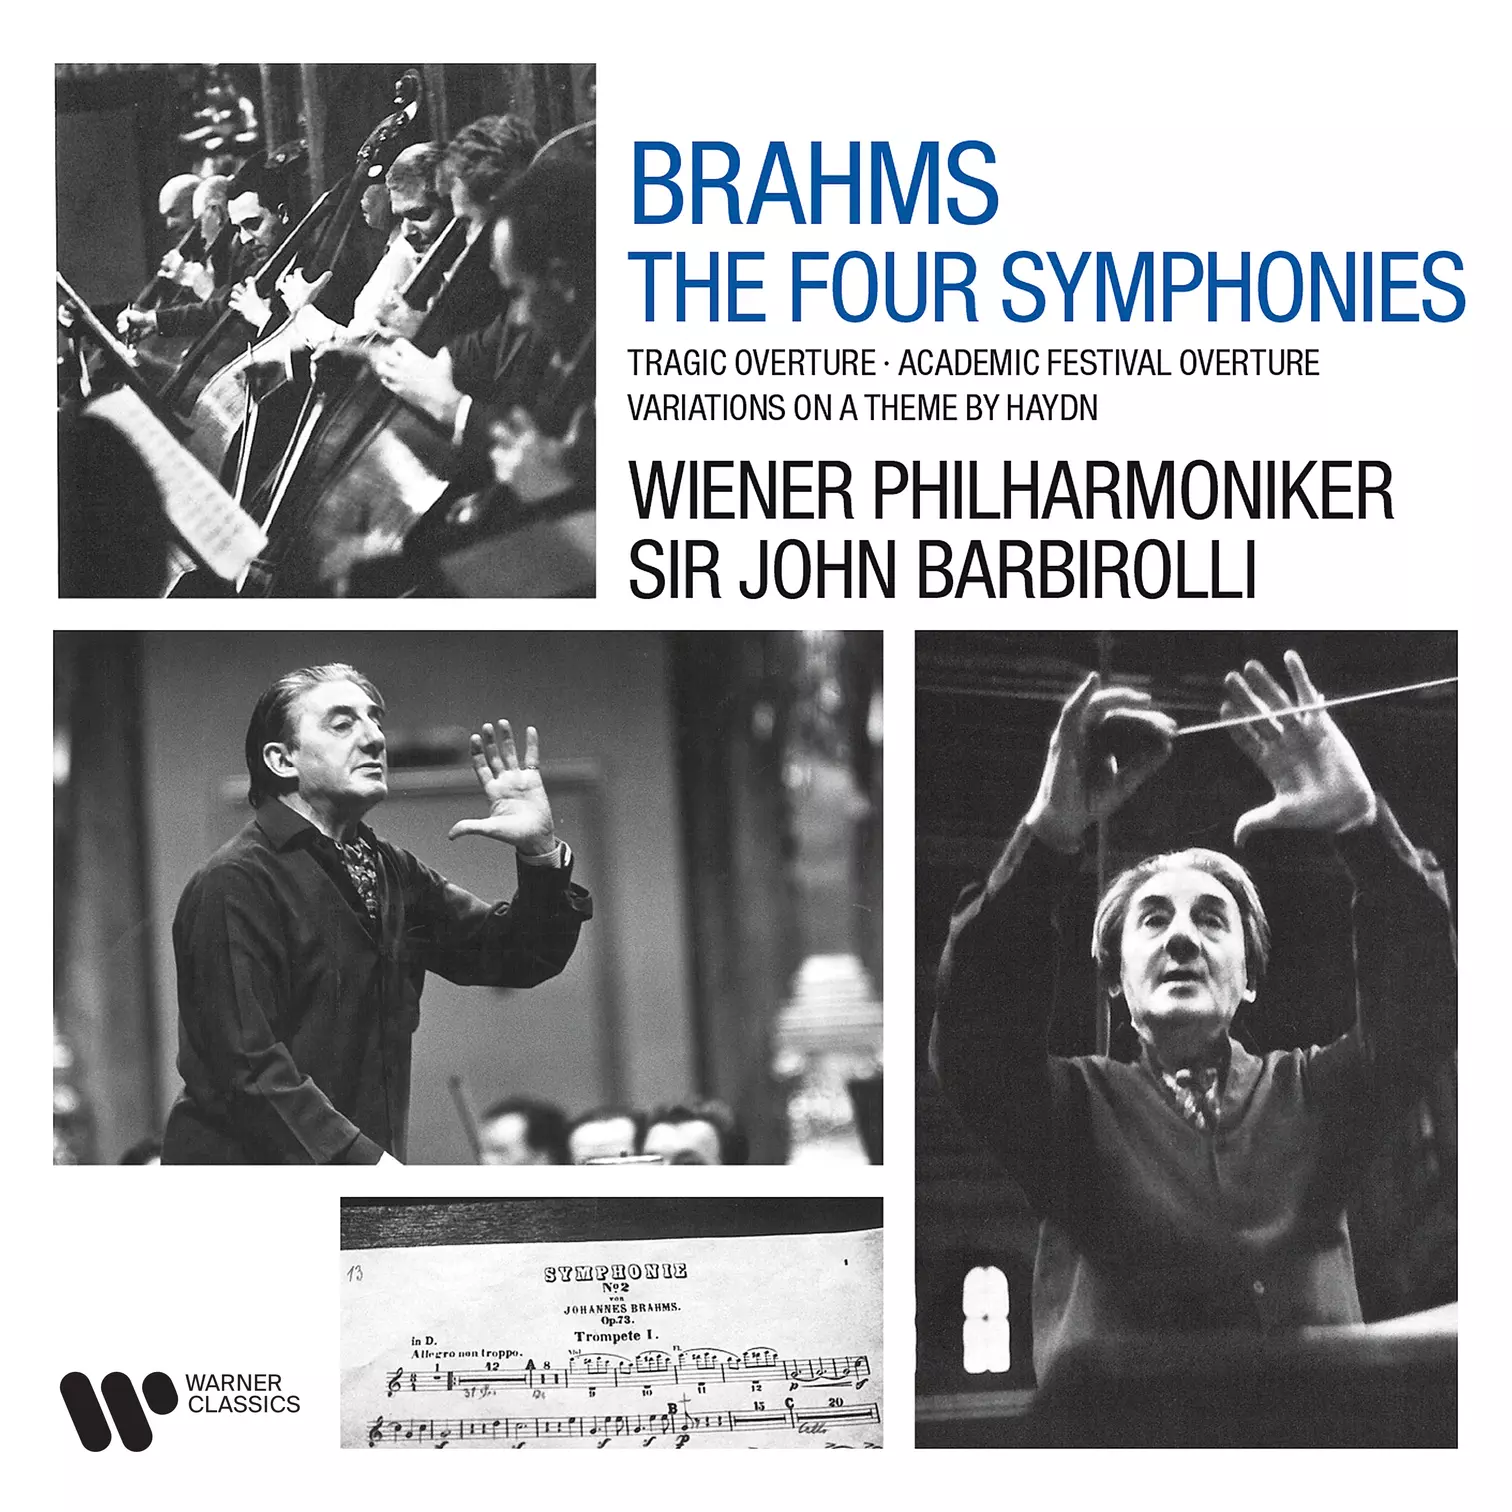 Brahms: Symphonies, Tragic Overture, Academic Festival Overture & Variations on a Theme by Haydn